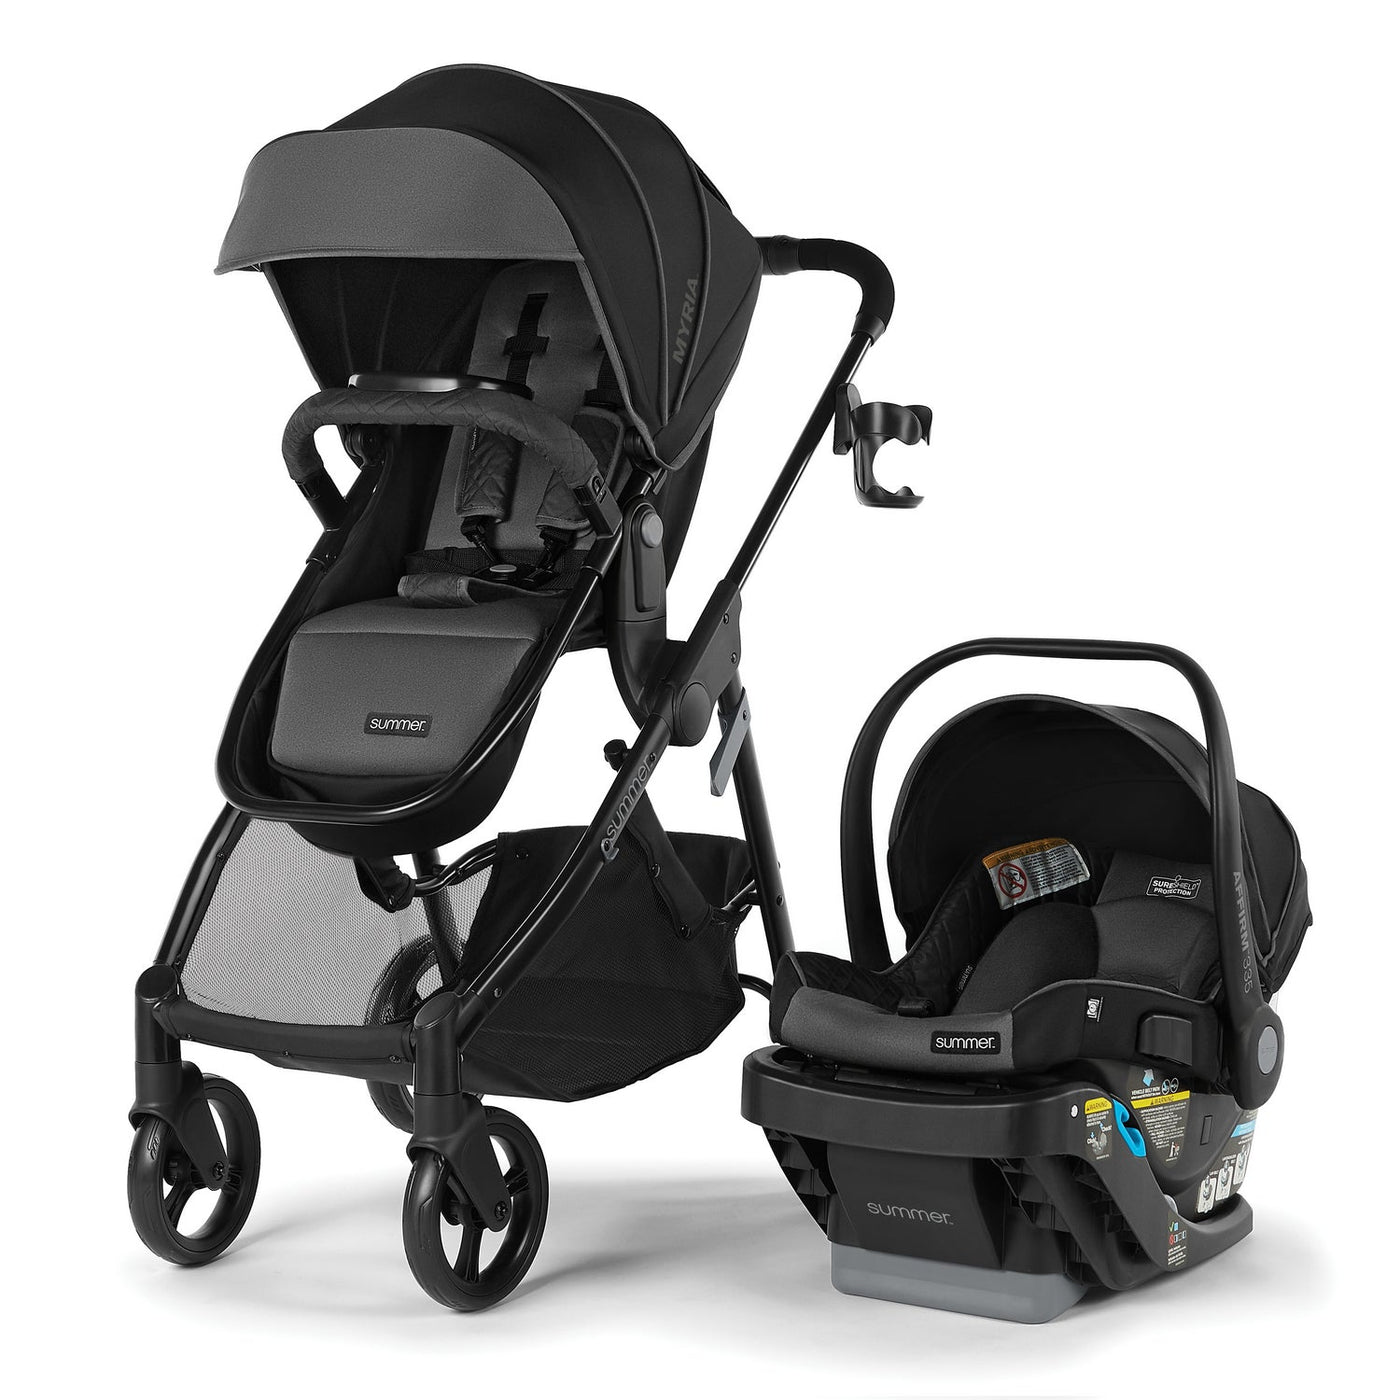 Summer Myria DLX Modular Travel System with the Affirm 335 DLX Rear-Facing Infant Car Seat | Slate Gray